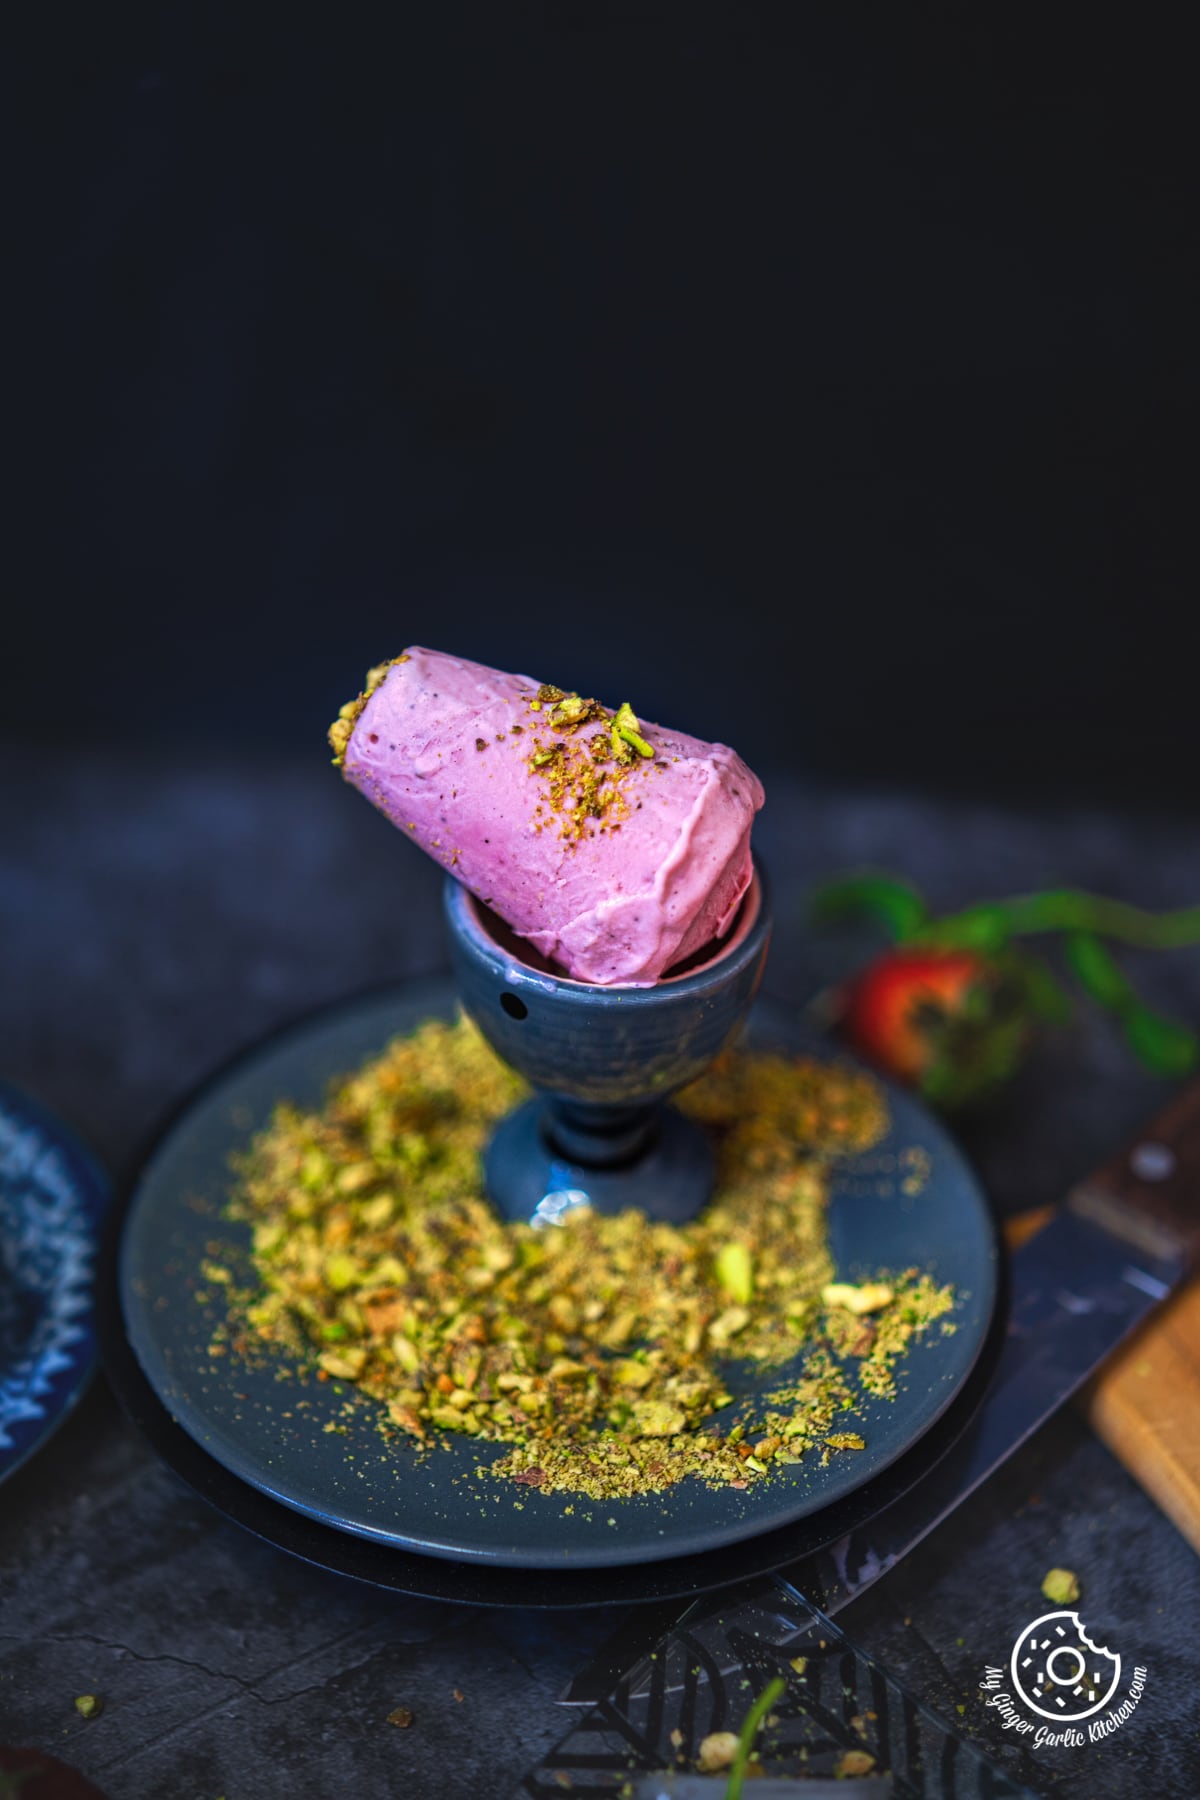 a strawberry kulfi served in a ceramic glass, topped with powdered pistachio nuts